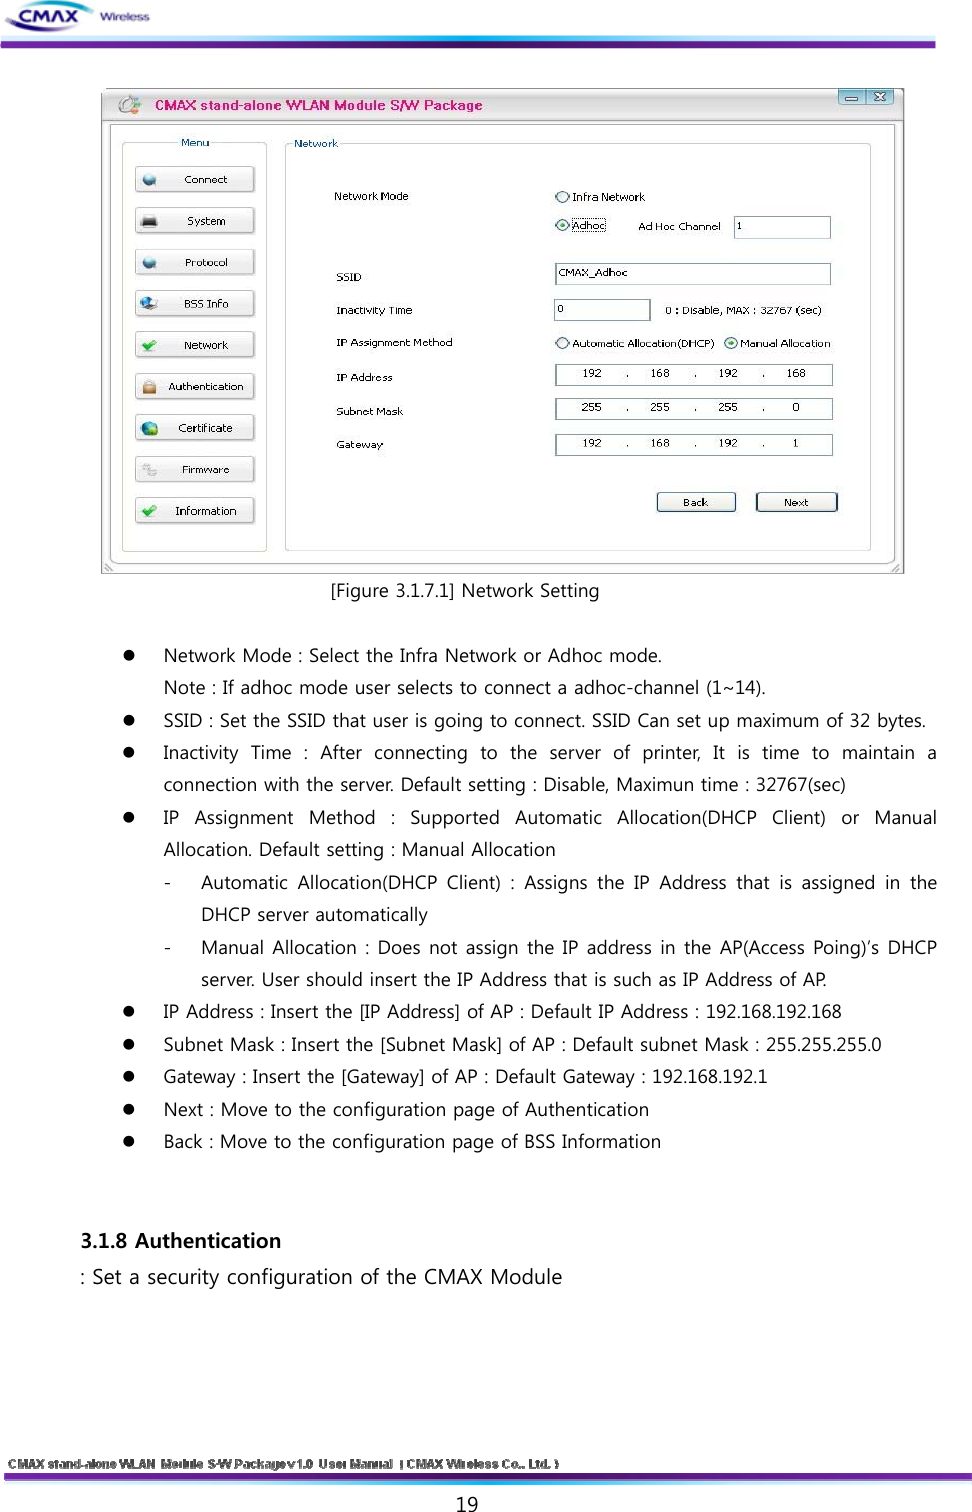   19   [Figure 3.1.7.1] Network Setting   Network Mode : Select the Infra Network or Adhoc mode.   Note : If adhoc mode user selects to connect a adhoc-channel (1~14).  SSID : Set the SSID that user is going to connect. SSID Can set up maximum of 32 bytes.  Inactivity  Time  :  After  connecting  to  the  server  of  printer,  It is time to maintain a connection with the server. Default setting : Disable, Maximun time : 32767(sec)  IP  Assignment  Method  :  Supported  Automatic  Allocation(DHCP  Client)  or  Manual Allocation. Default setting : Manual Allocation - Automatic  Allocation(DHCP  Client)  :  Assigns  the  IP  Address  that is  assigned  in  the DHCP server automatically - Manual Allocation : Does not assign the IP address in the AP(Access Poing)’s DHCP server. User should insert the IP Address that is such as IP Address of AP.  IP Address : Insert the [IP Address] of AP : Default IP Address : 192.168.192.168  Subnet Mask : Insert the [Subnet Mask] of AP : Default subnet Mask : 255.255.255.0  Gateway : Insert the [Gateway] of AP : Default Gateway : 192.168.192.1  Next : Move to the configuration page of Authentication  Back : Move to the configuration page of BSS Information   3.1.8 Authentication : Set a security configuration of the CMAX Module    